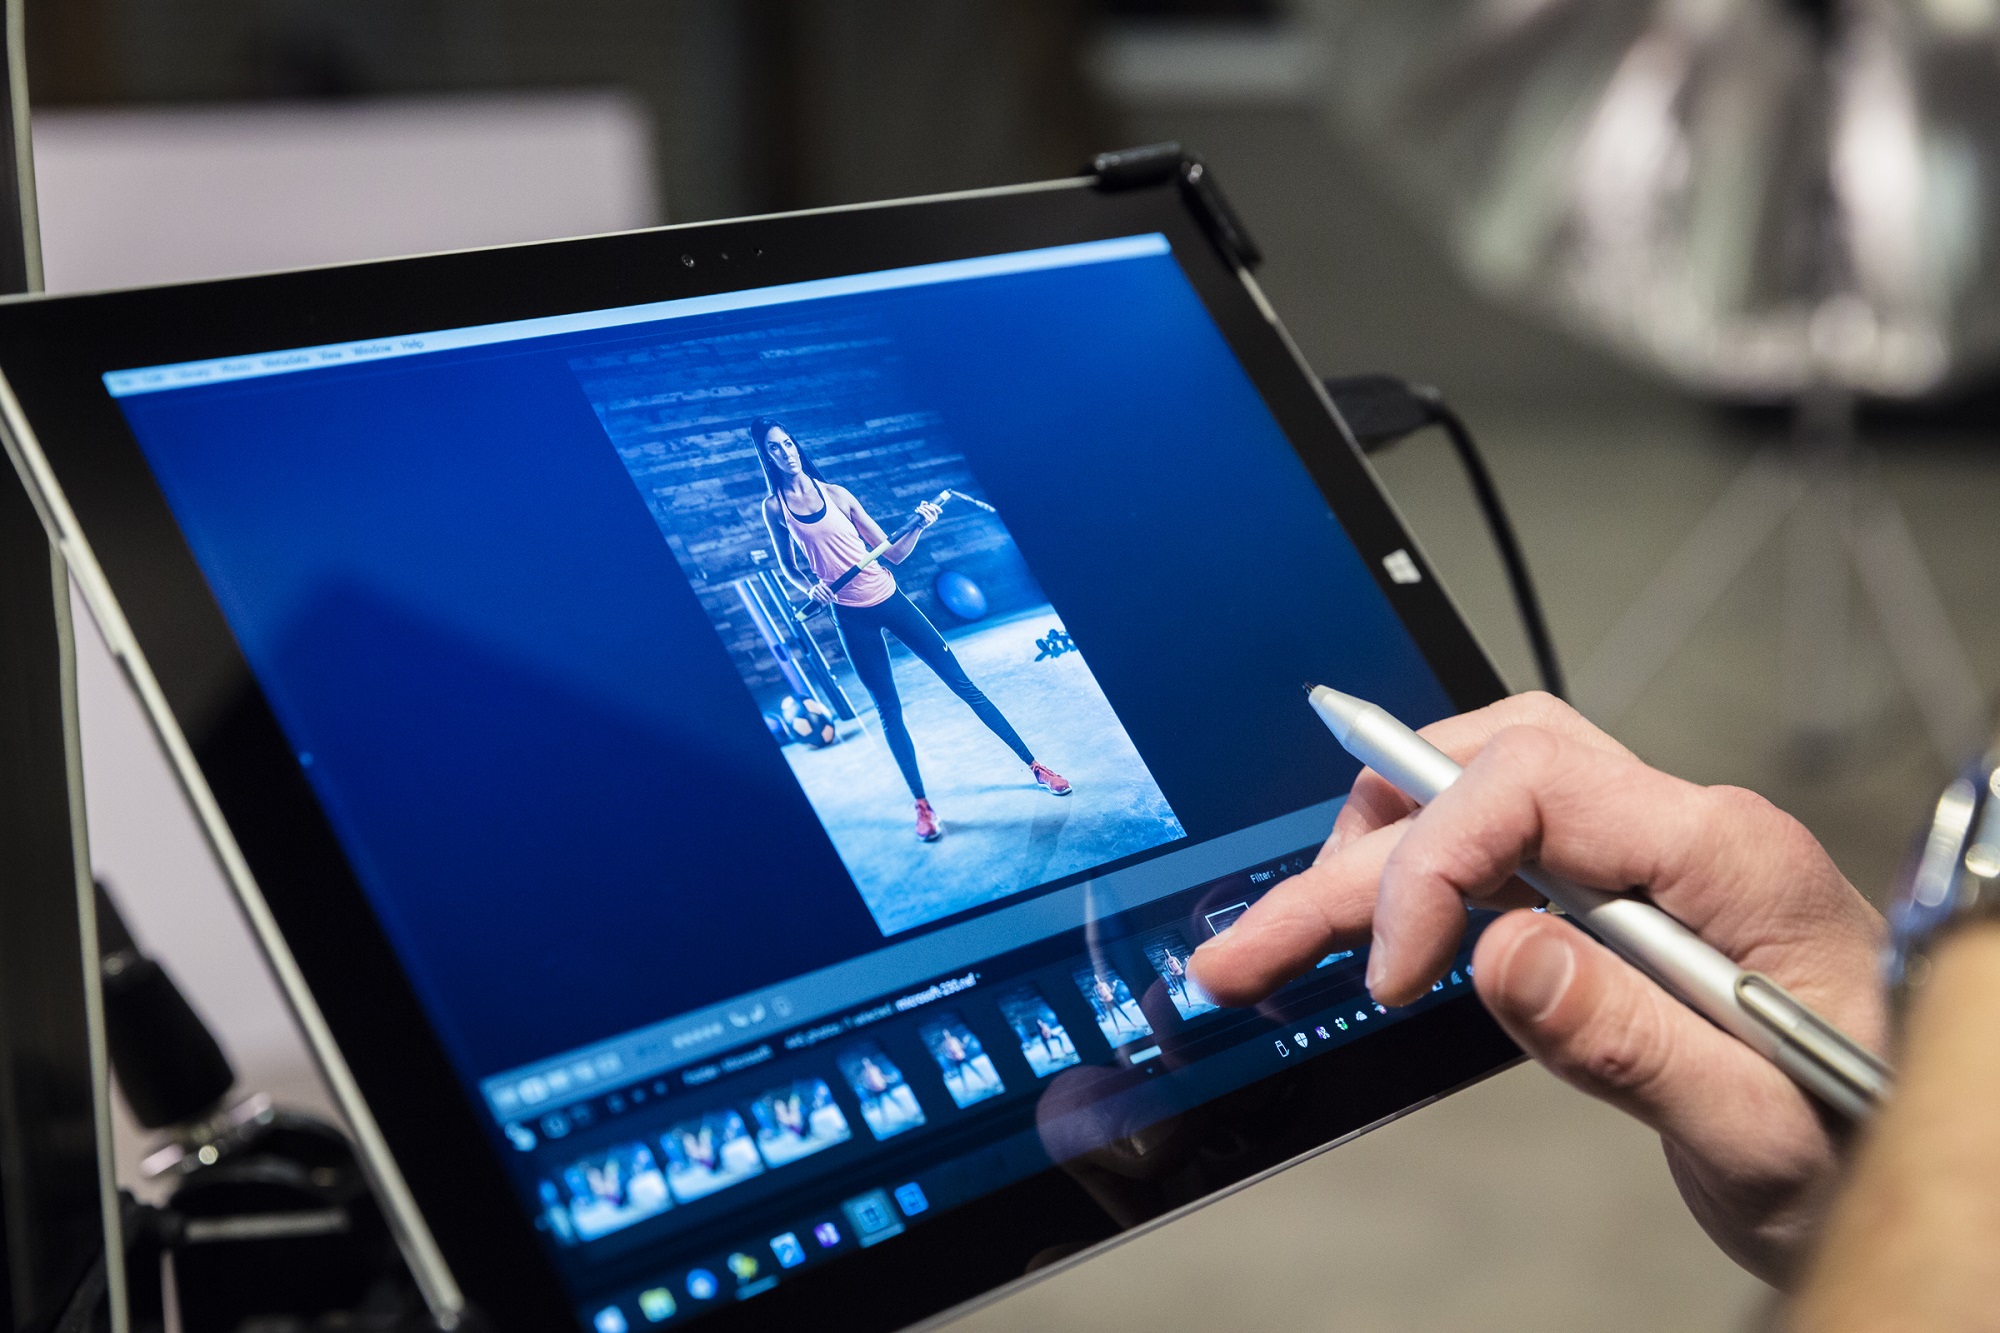 Microsoft Surface Pro 4 Tablet for Photographers  Expert photography  blogs, tip, techniques, camera reviews - Adorama Learning Center